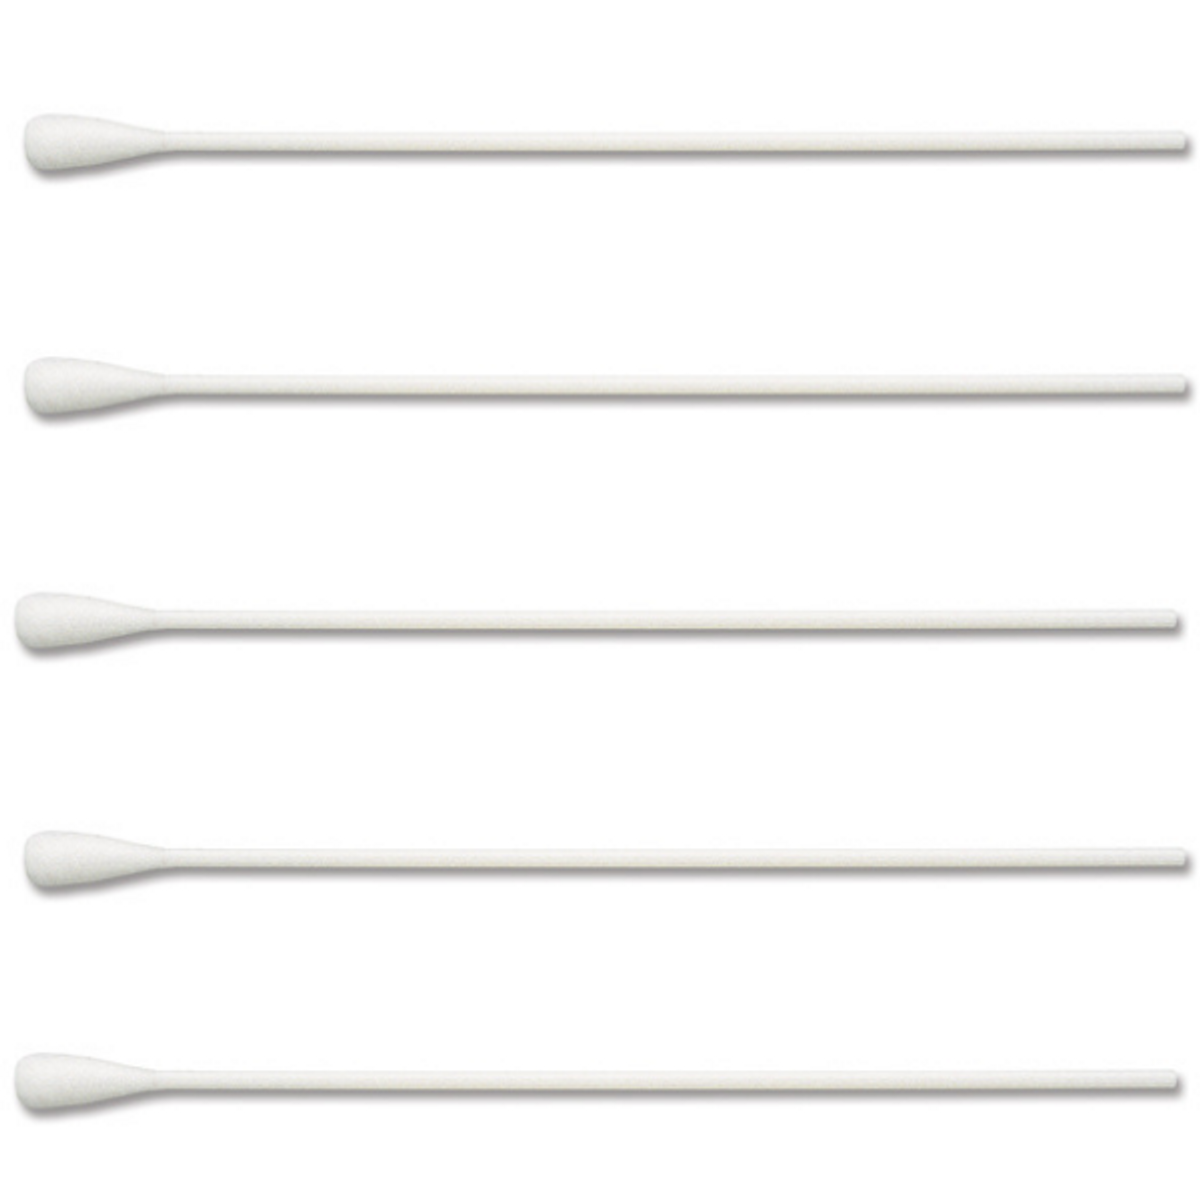 Non-sterile, Polystyrene handle, large tip, 6" x 0.25"